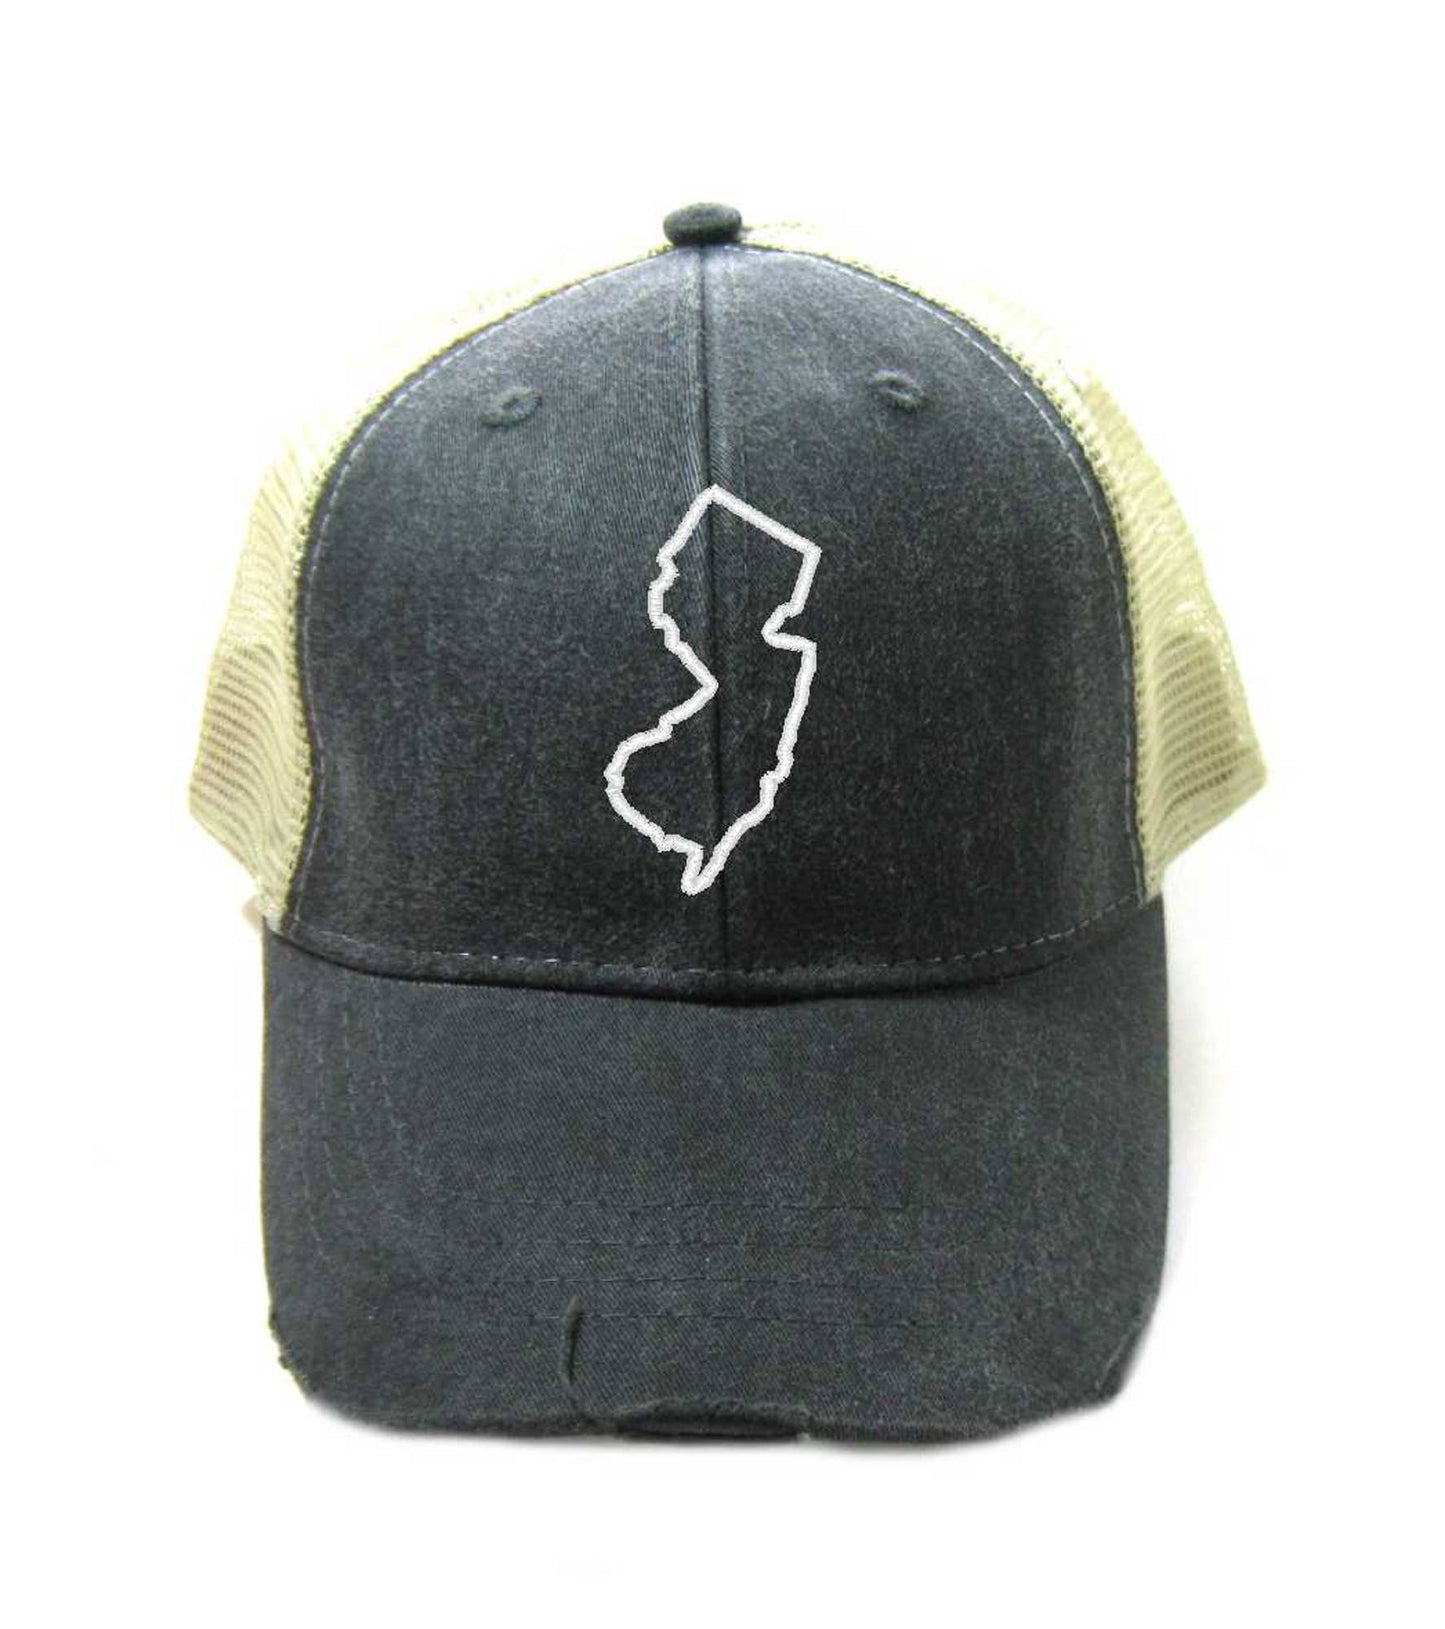 New Jersey Hat - Distressed Snapback Trucker Hat - New Jersey State Outline - Many Colors Available